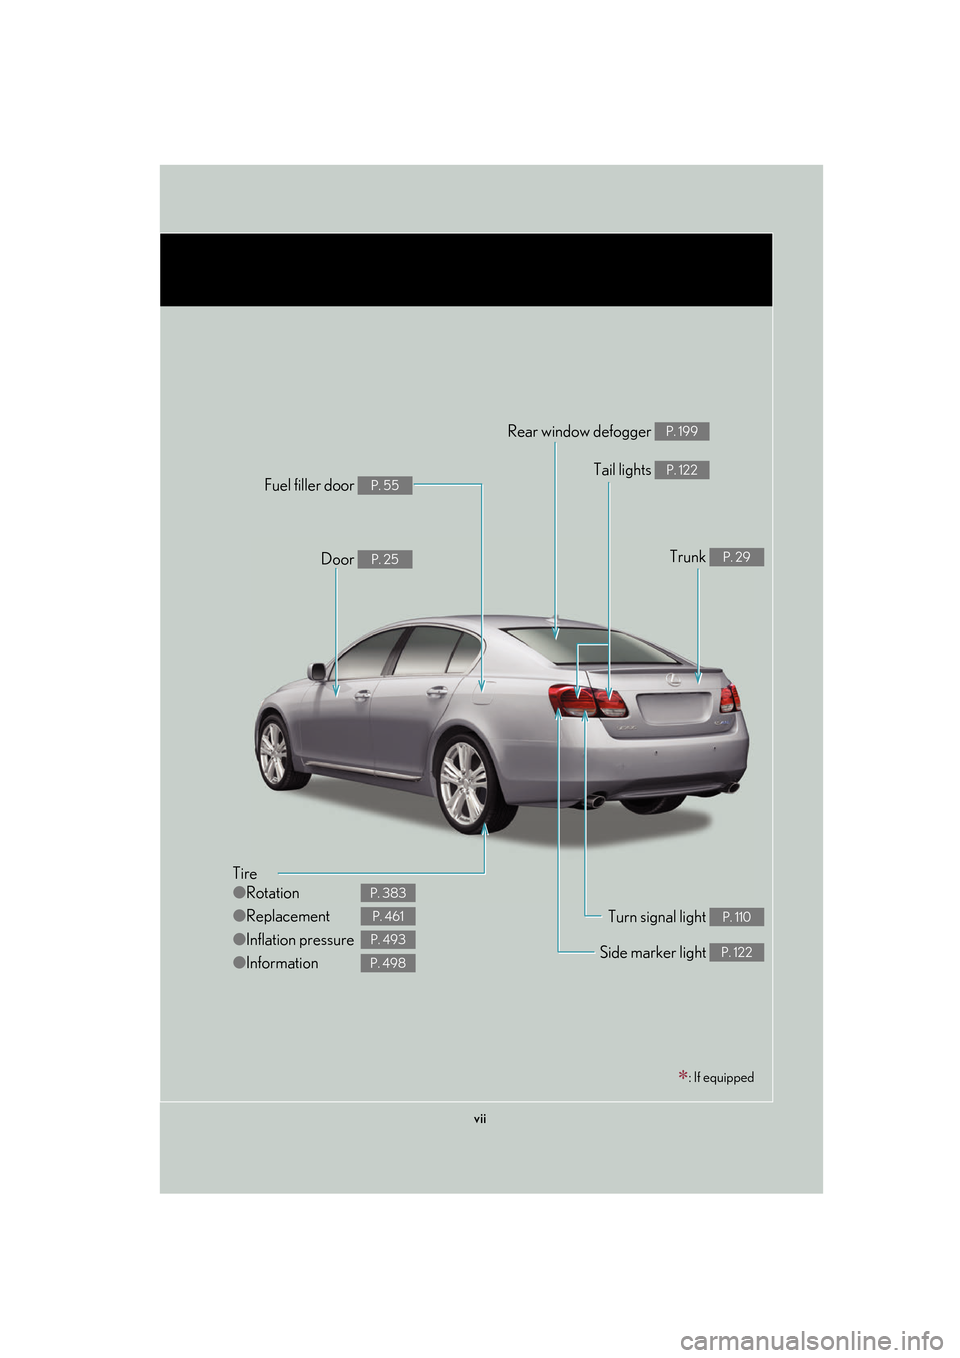 Lexus GS450h 2007  Hybrid system / LEXUS 2007 GS450H FROM JULY 2006 PROD. OWNERS MANUAL (OM30A05U) vii
Tire
●Rotation
● Replacement
● Inflation pressure
● Information
P. 383
P. 461
P. 493
P. 498
Tail lights P. 122
Side marker light P. 122
Trunk P. 29
Rear window defogger P. 199
Door P. 25
F